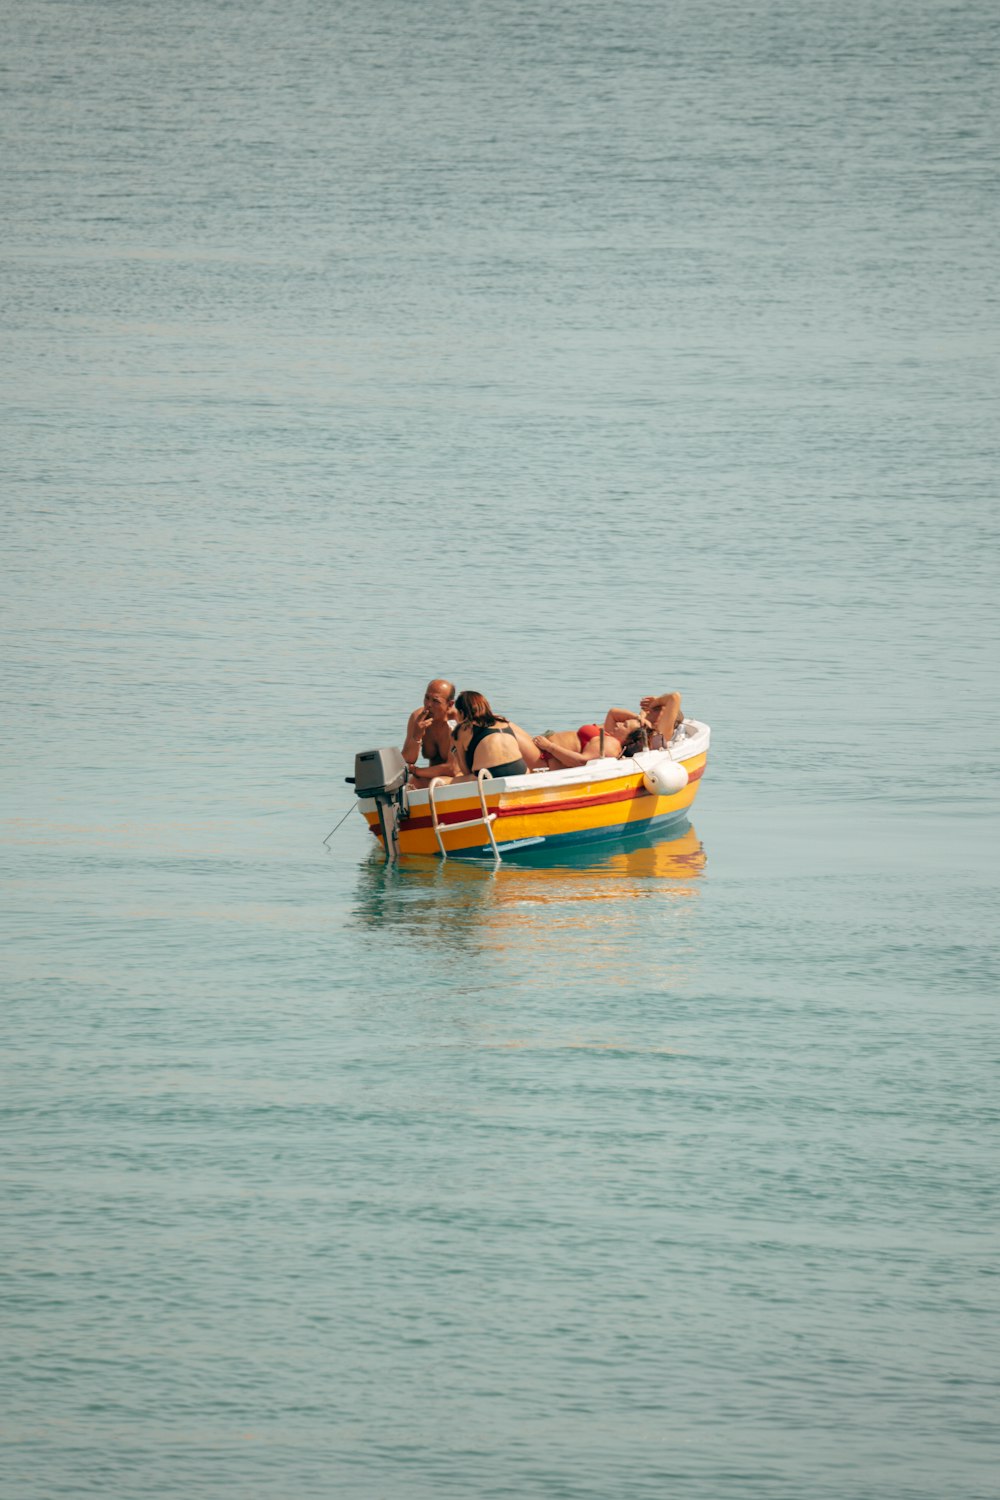 a group of people riding on the back of a yellow and blue boat